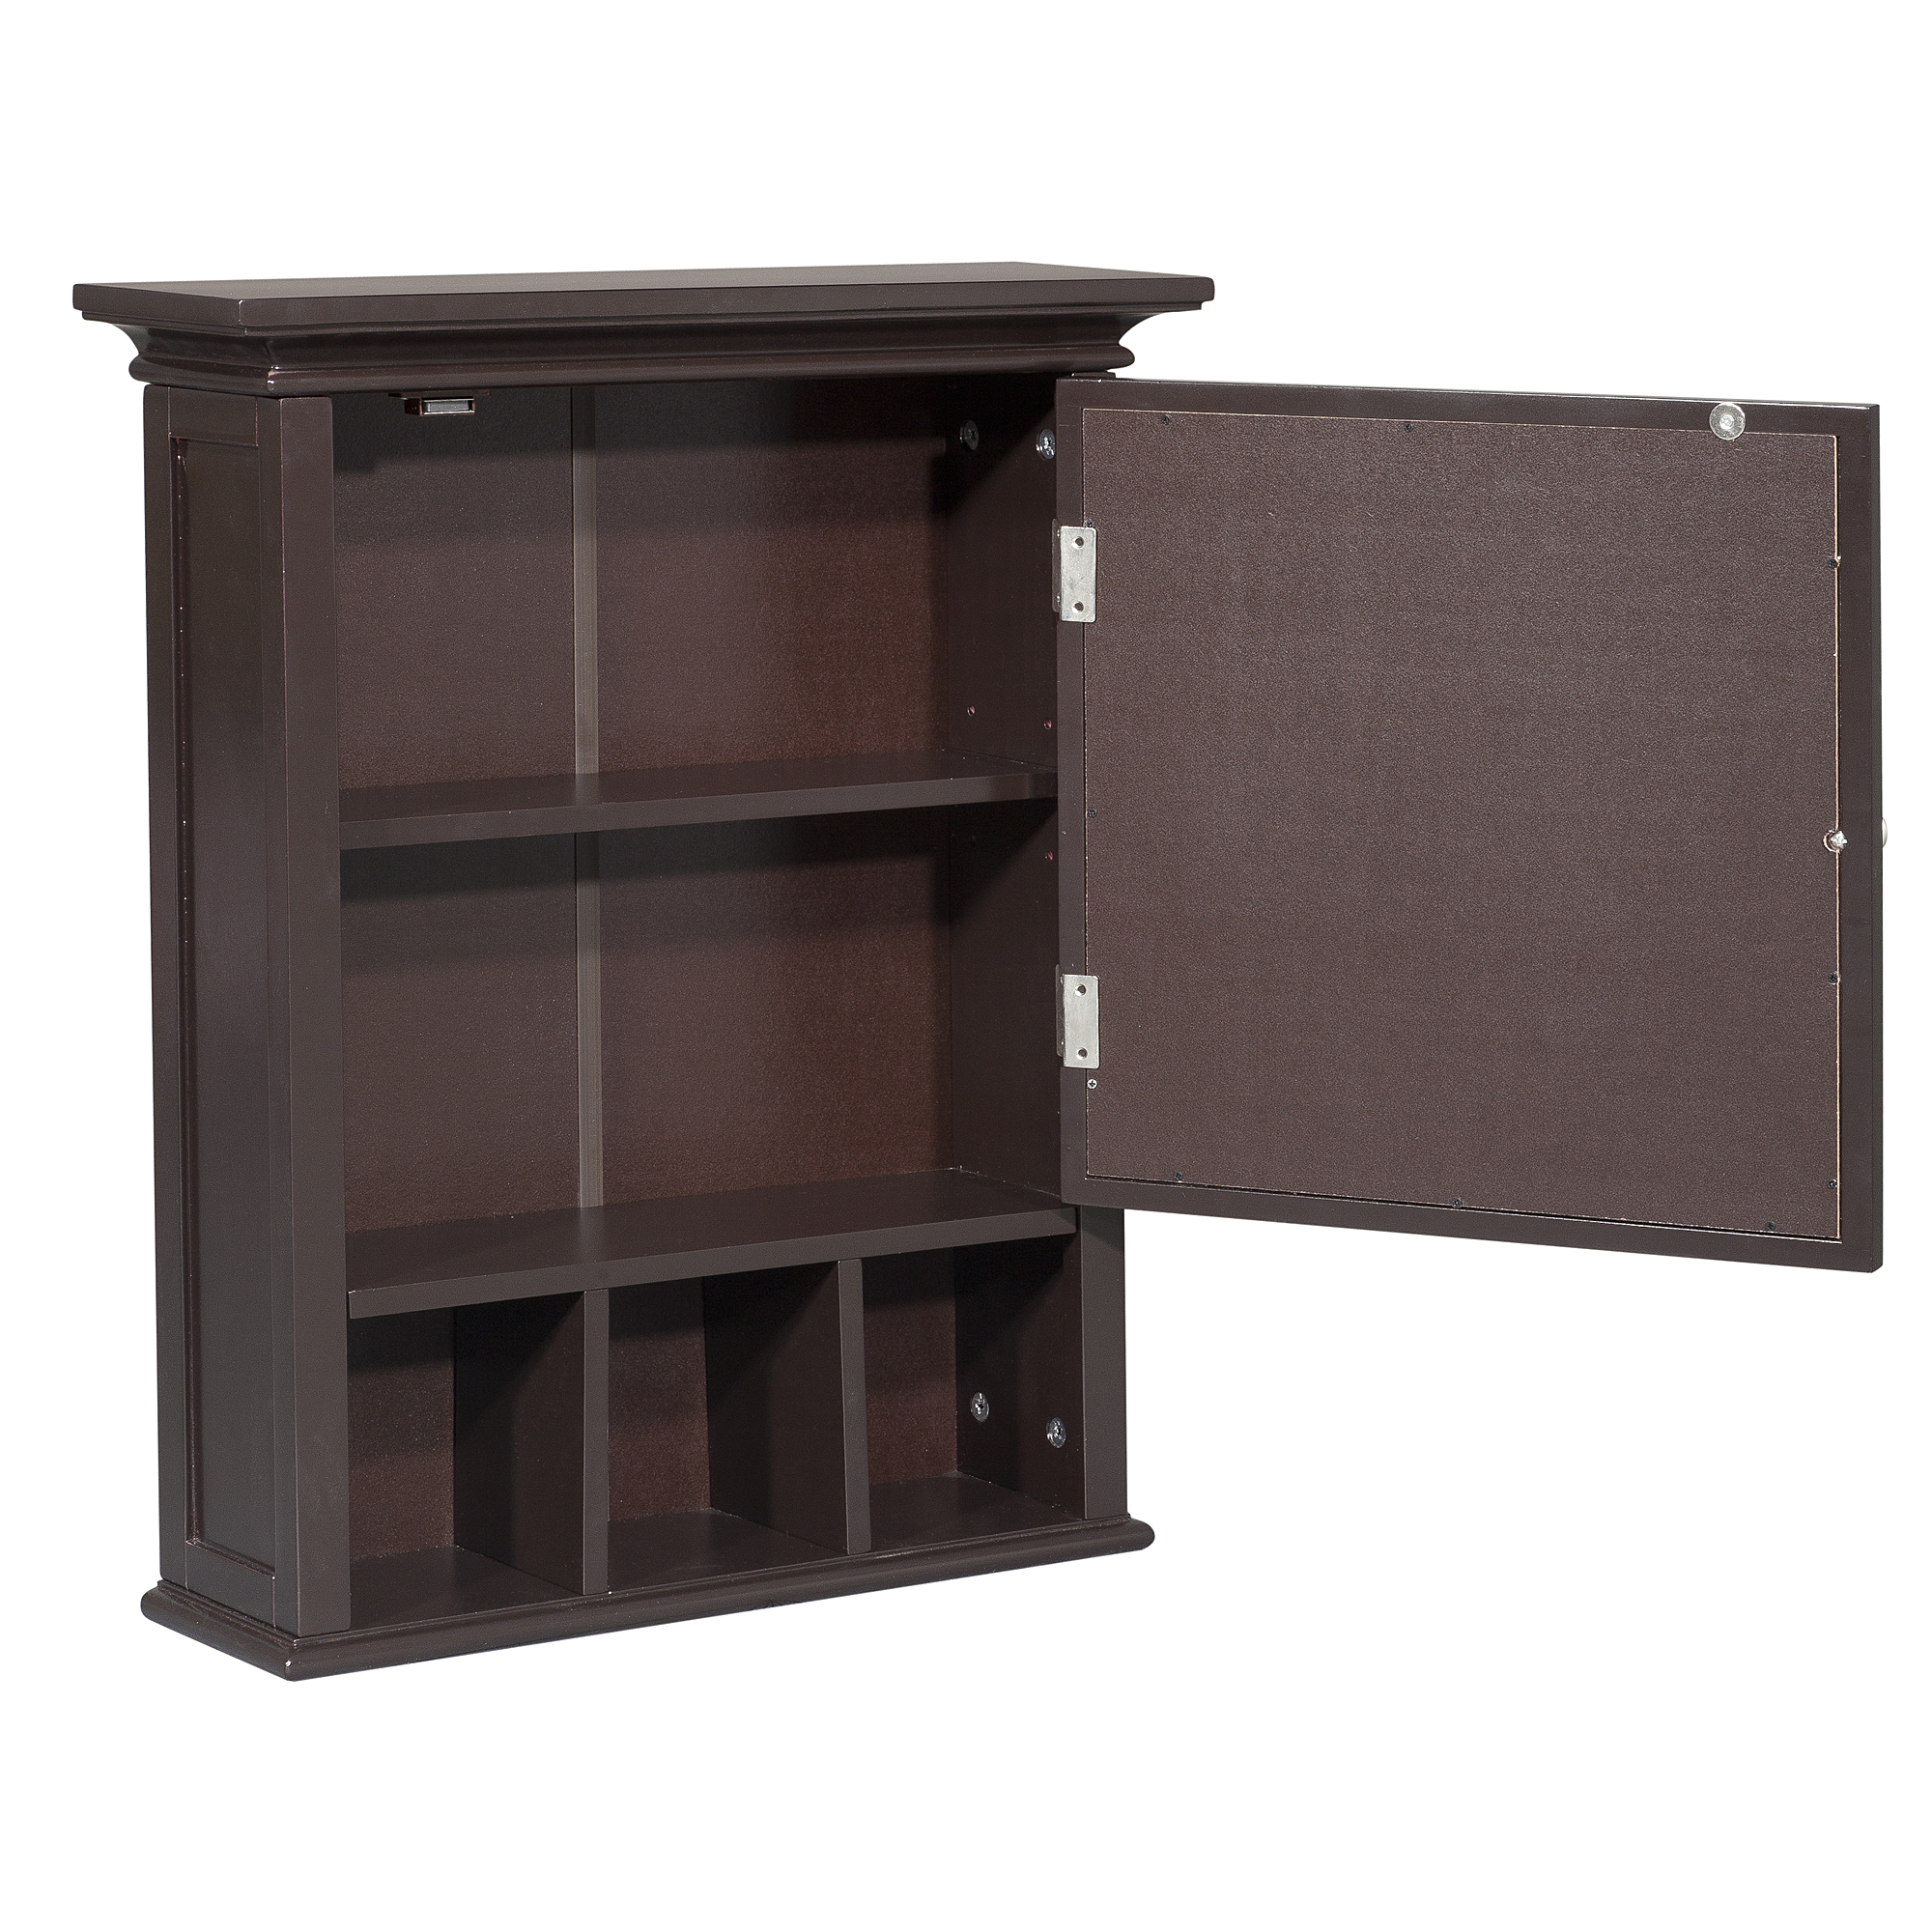 Teamson Home Neal Removable Wooden Medicine Cabinet with Mirrored Door, Espresso - image 5 of 7